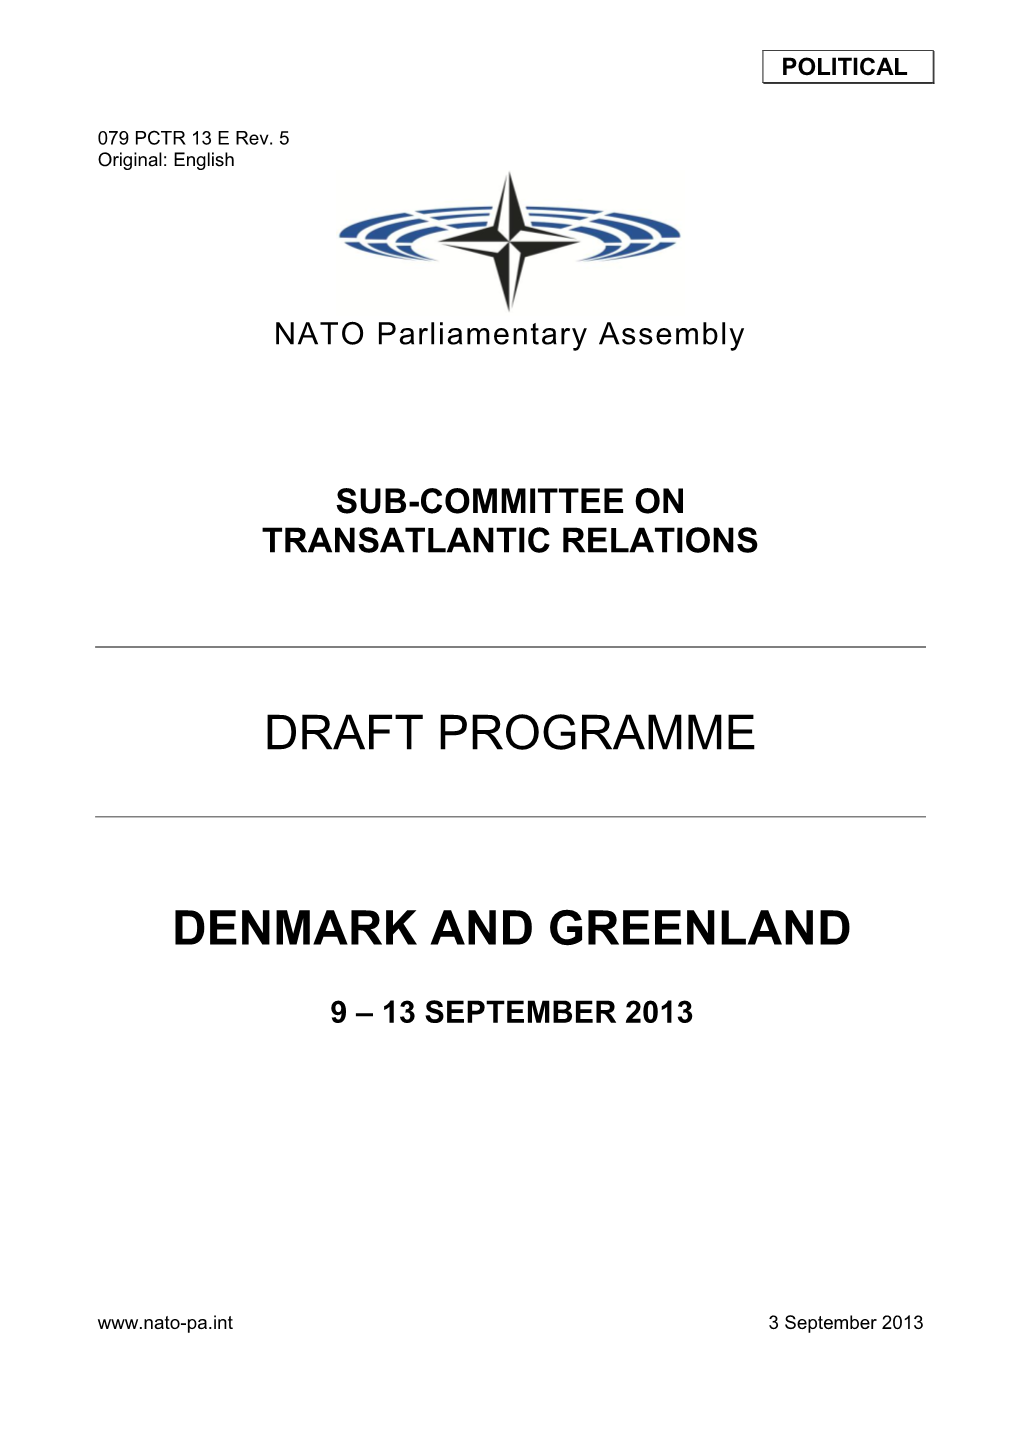 Draft Programme Denmark and Greenland